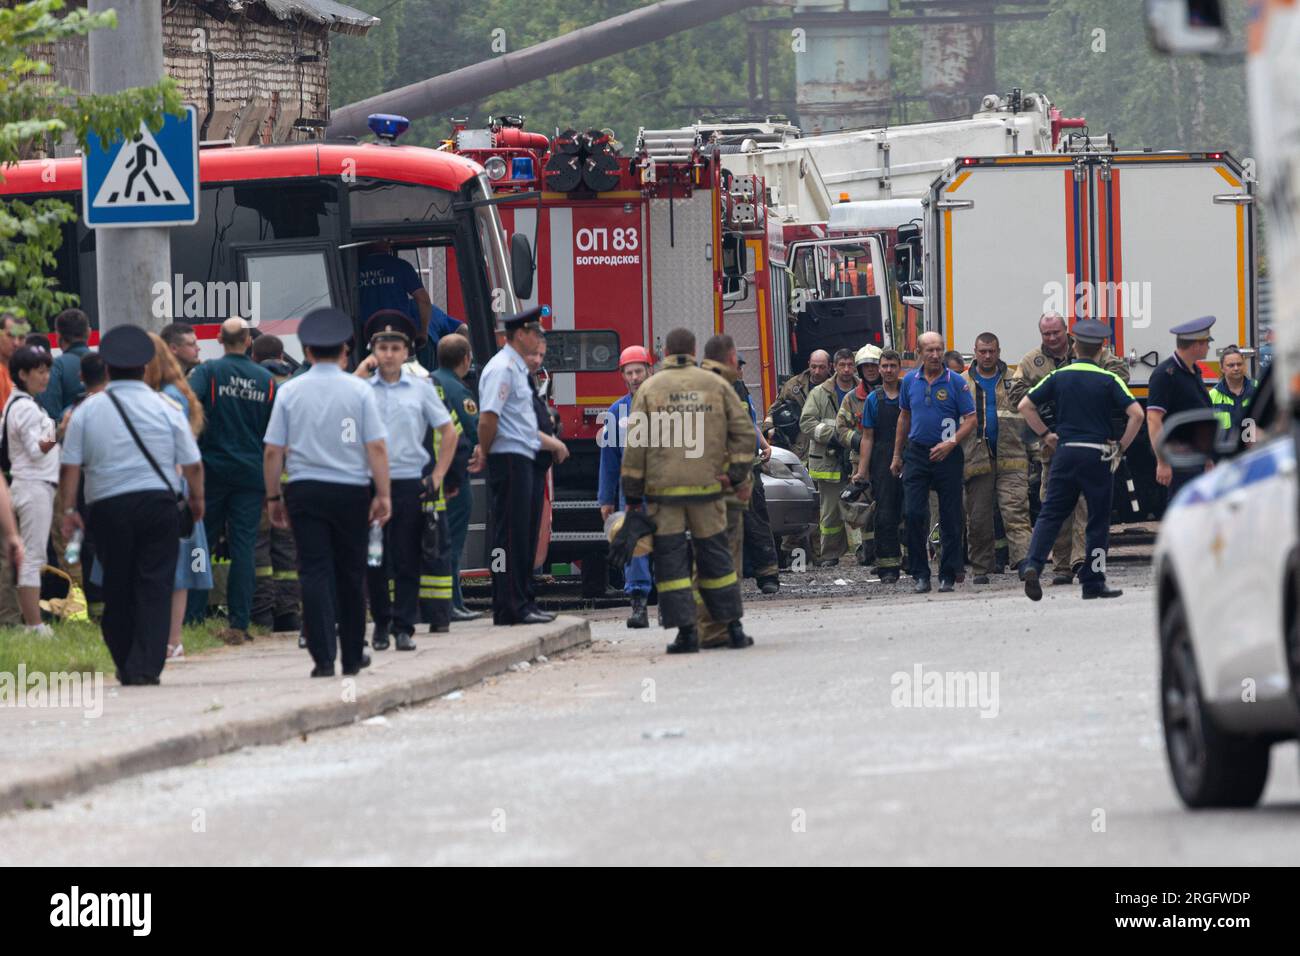 (230809) -- MOSCOW, Aug. 9, 2023 (Xinhua) -- Rescuers are seen at the blast site of a plant in Moscow region, Russia, Aug. 9, 2023. Forty-three people have been injured so far in a blast at an optical-mechanical plant in the city of Sergiev Posad in the Moscow region on Wednesday, local authorities said. The explosion happened on Wednesday morning at around 10:40 a.m. local time (0740 GMT) at a pyrotechnics warehouse, which was being rented out on the optical-mechanical plant's territory by a private company, said Governor of the Moscow Region Andrei Vorobiev in a Telegram post. (Xinhua/Bai Stock Photo